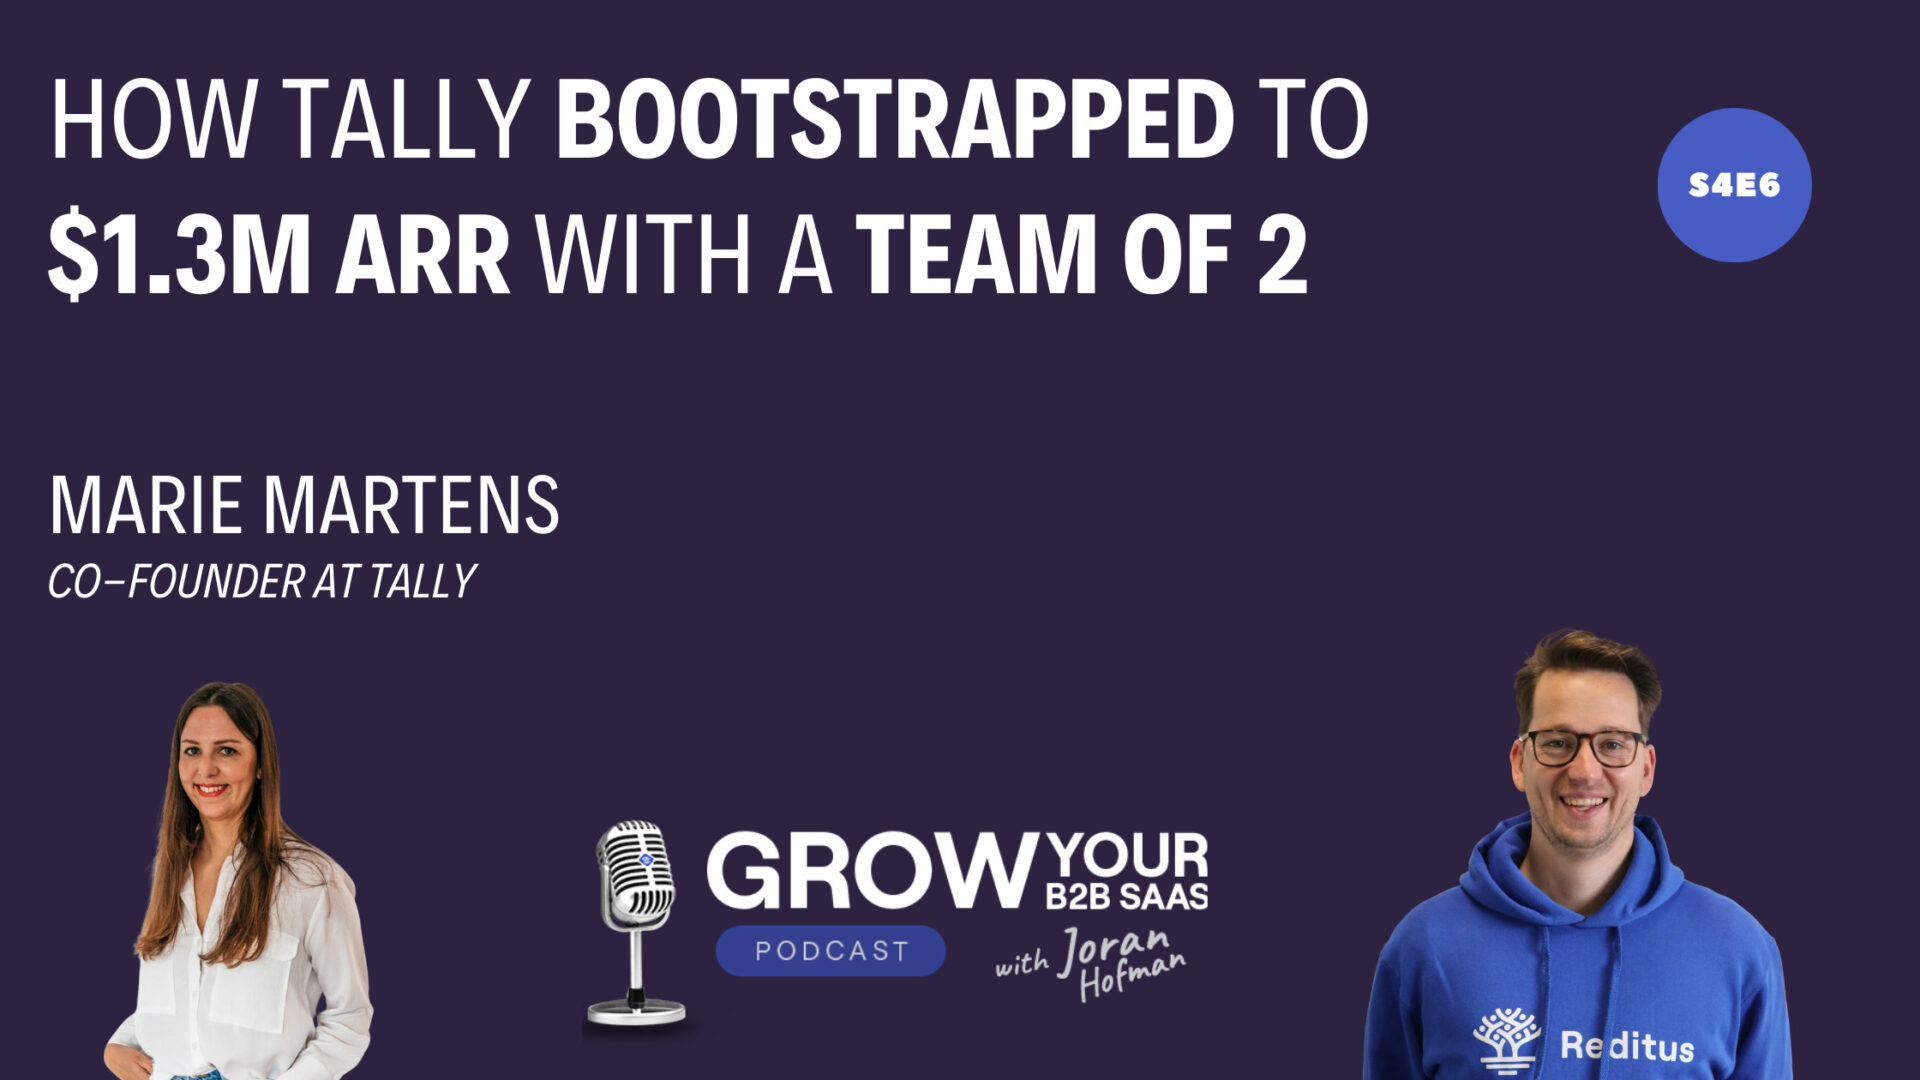 https://www.getreditus.com/podcast/s4e6-how-tally-bootstrapped-to-100k-mrr-with-a-team-of-2-with-marie-martens/